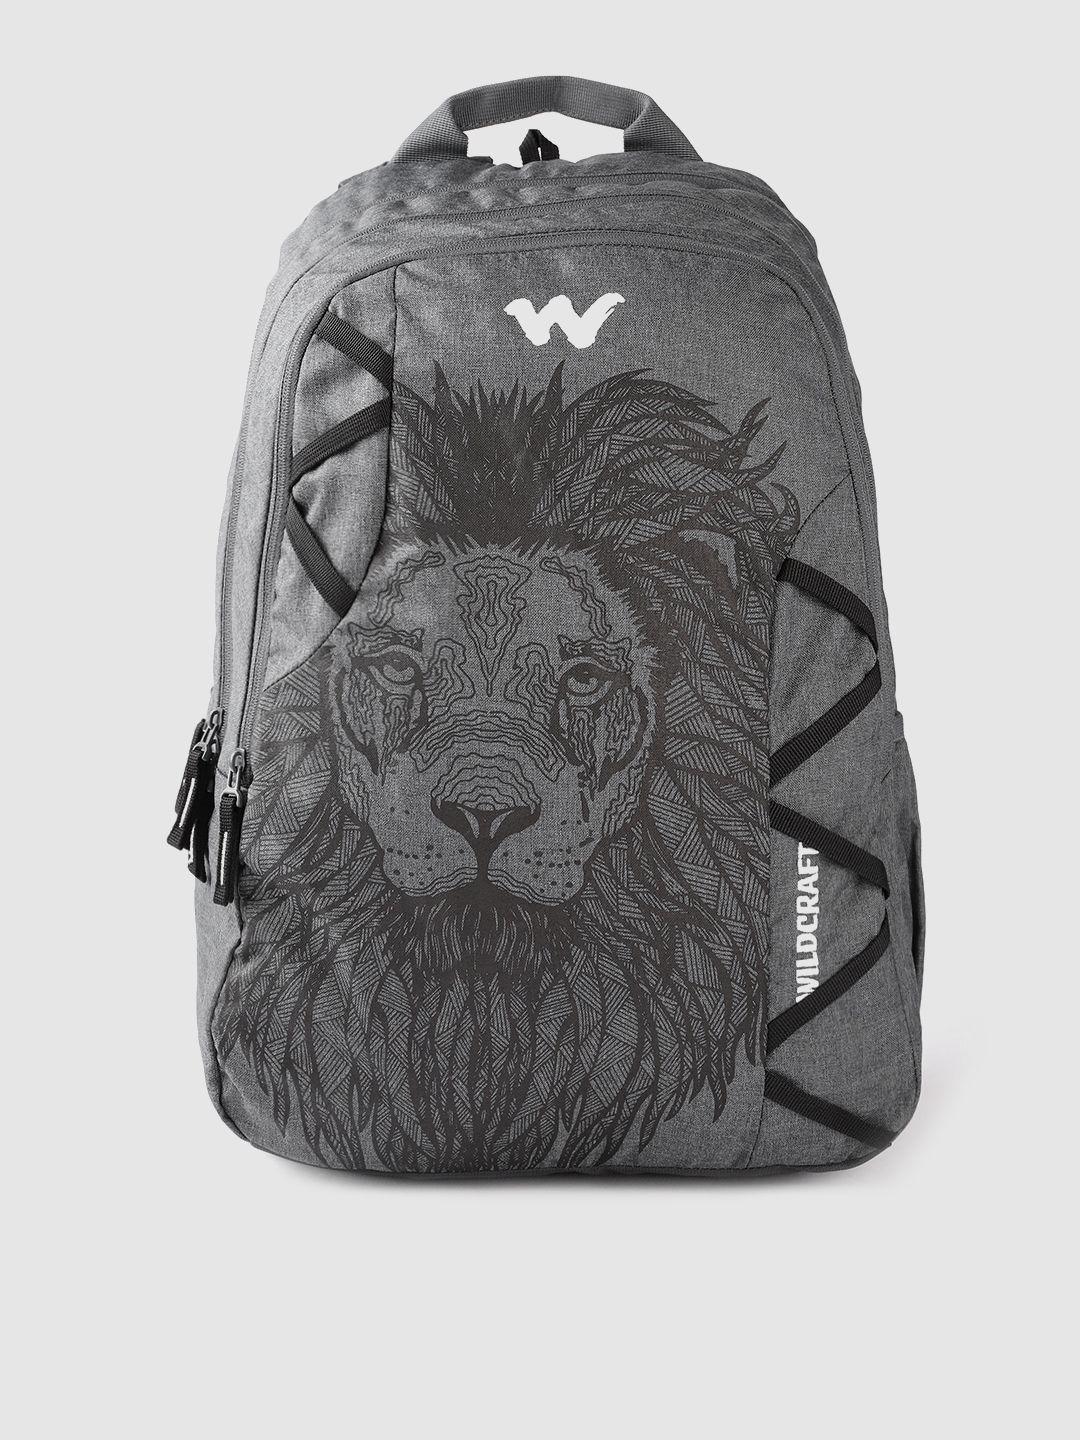 wildcraft unisex charcoal grey & black graphic print backpack 21.7 l